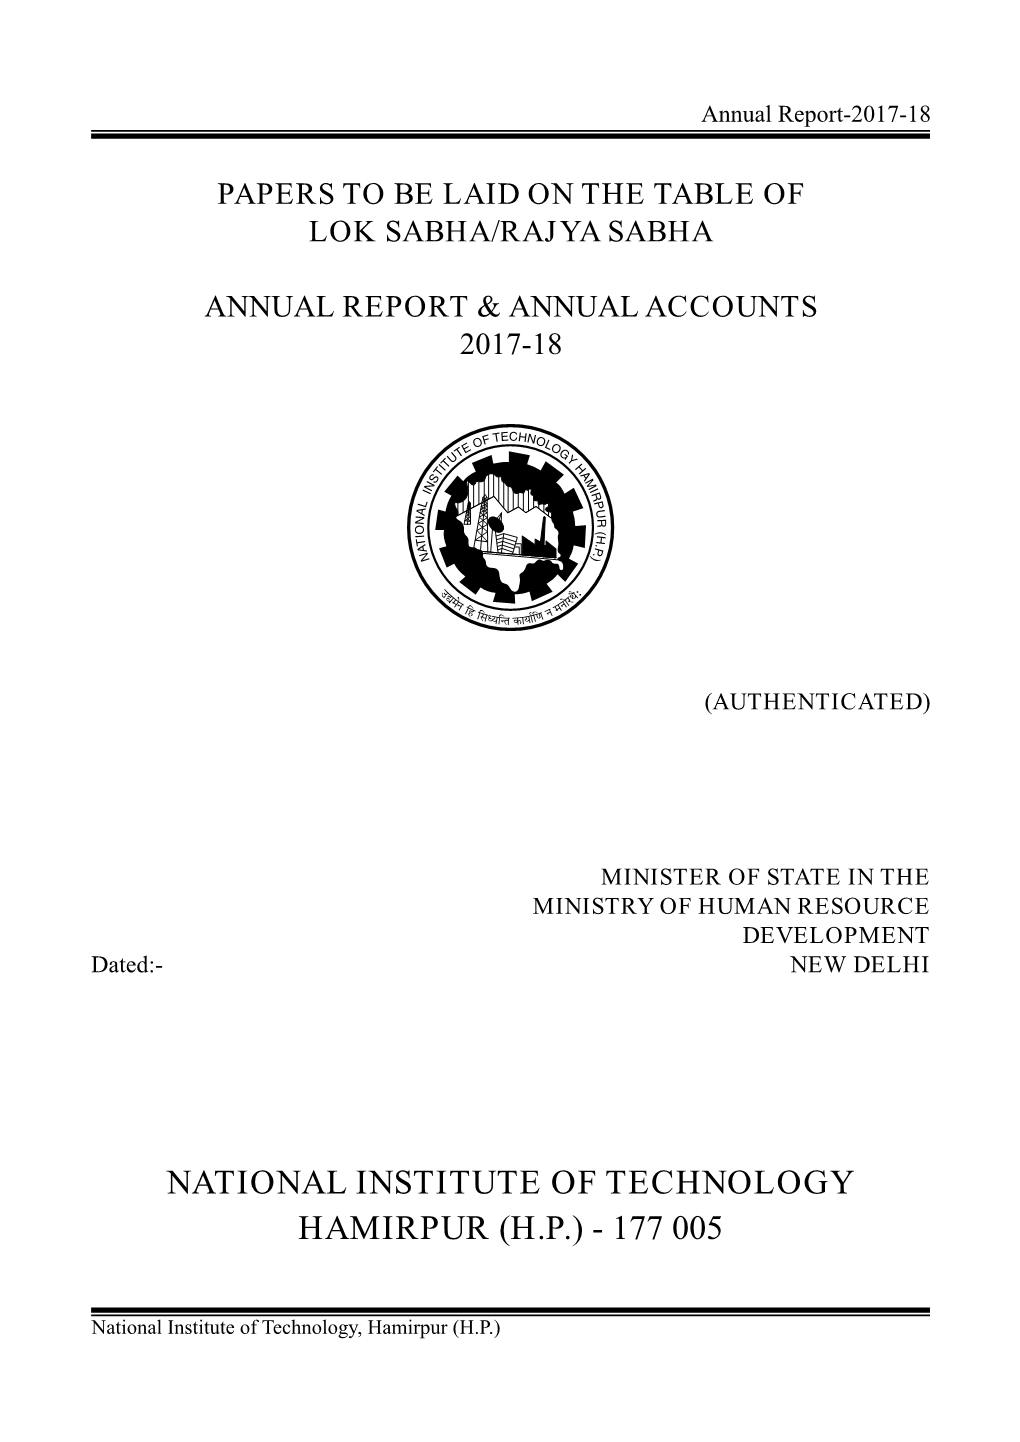 Annual Report of 2017-18